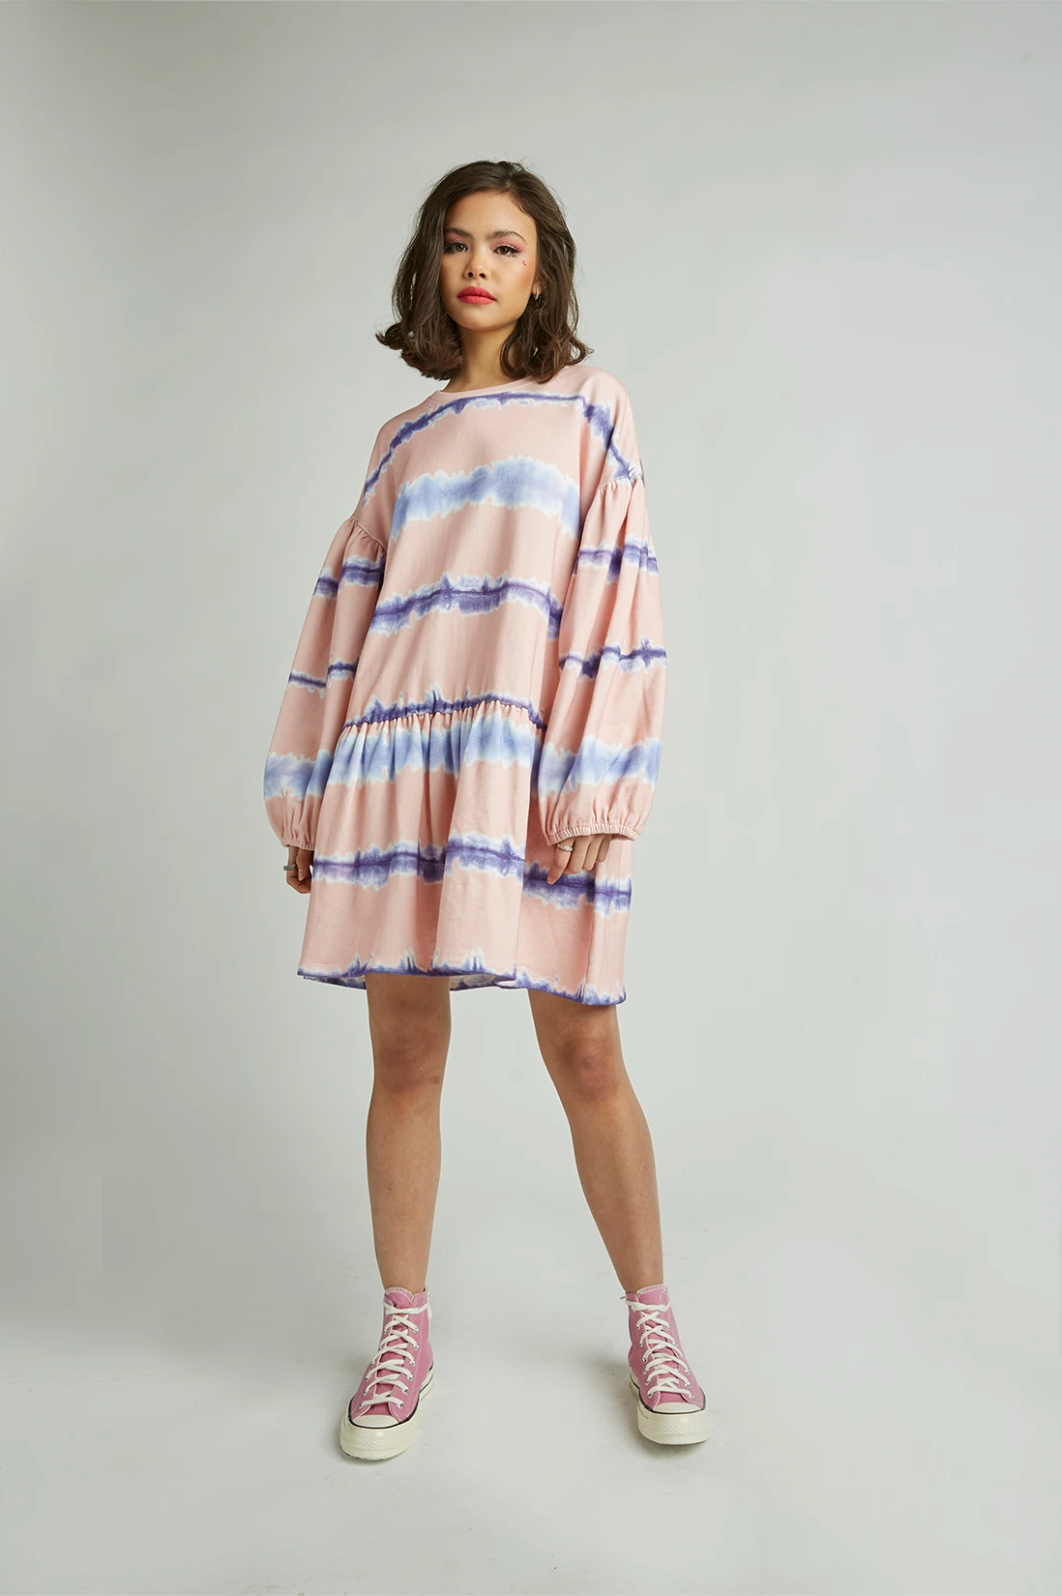 TIE DYE SWEATSHIRT DRESS - EXCLUSIVE Dresses from NGO - Just $33.00! SHOP NOW AT IAMINHATELOVE BOTH IN STORE FOR CYPRUS AND ONLINE WORLDWIDE